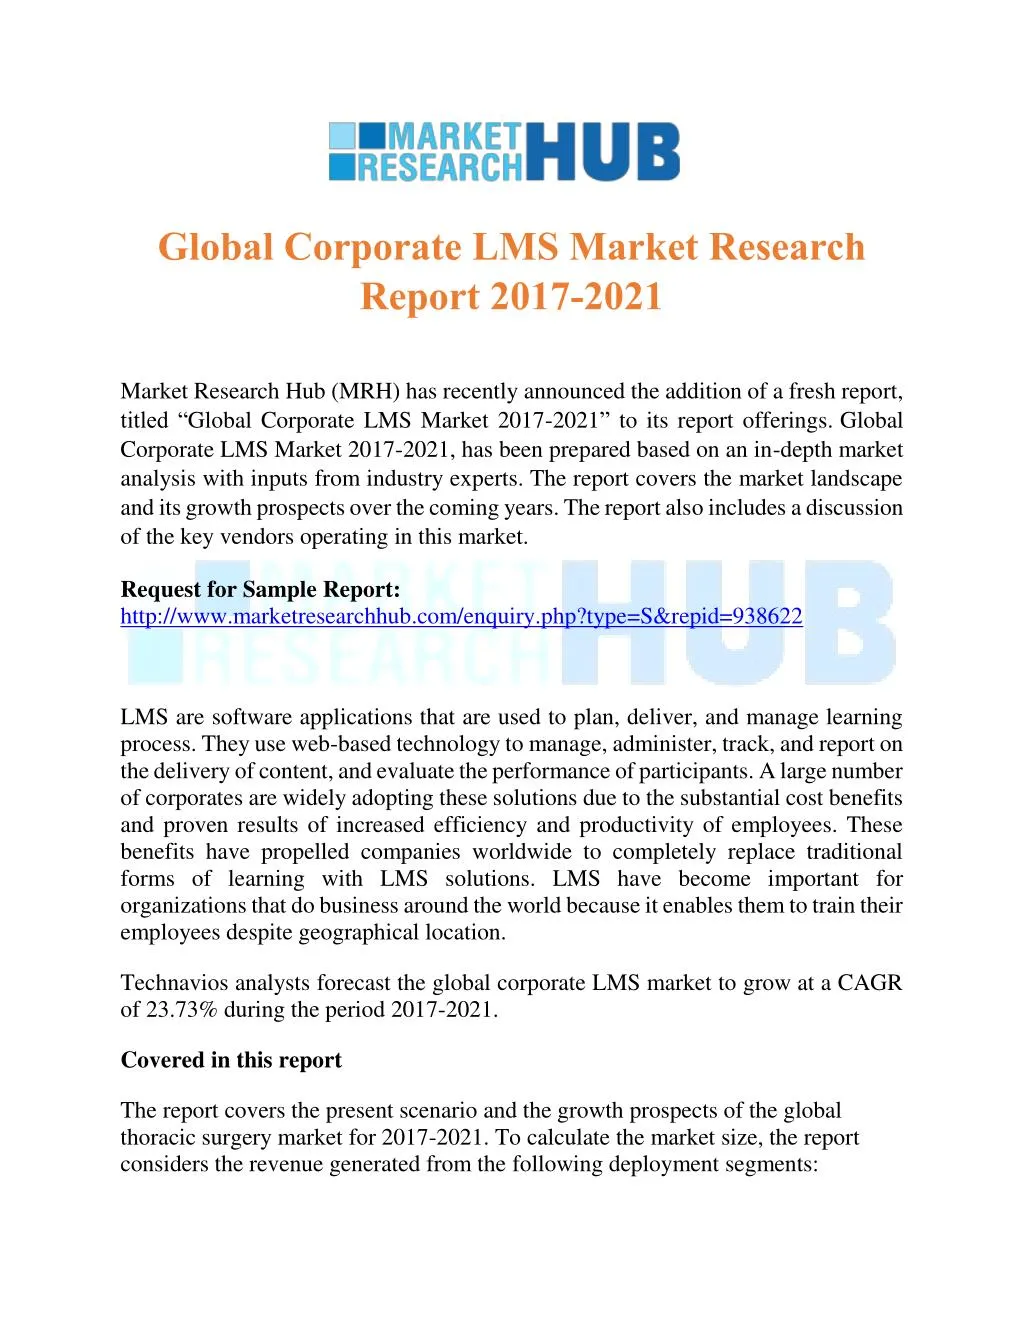 global corporate lms market research report 2017